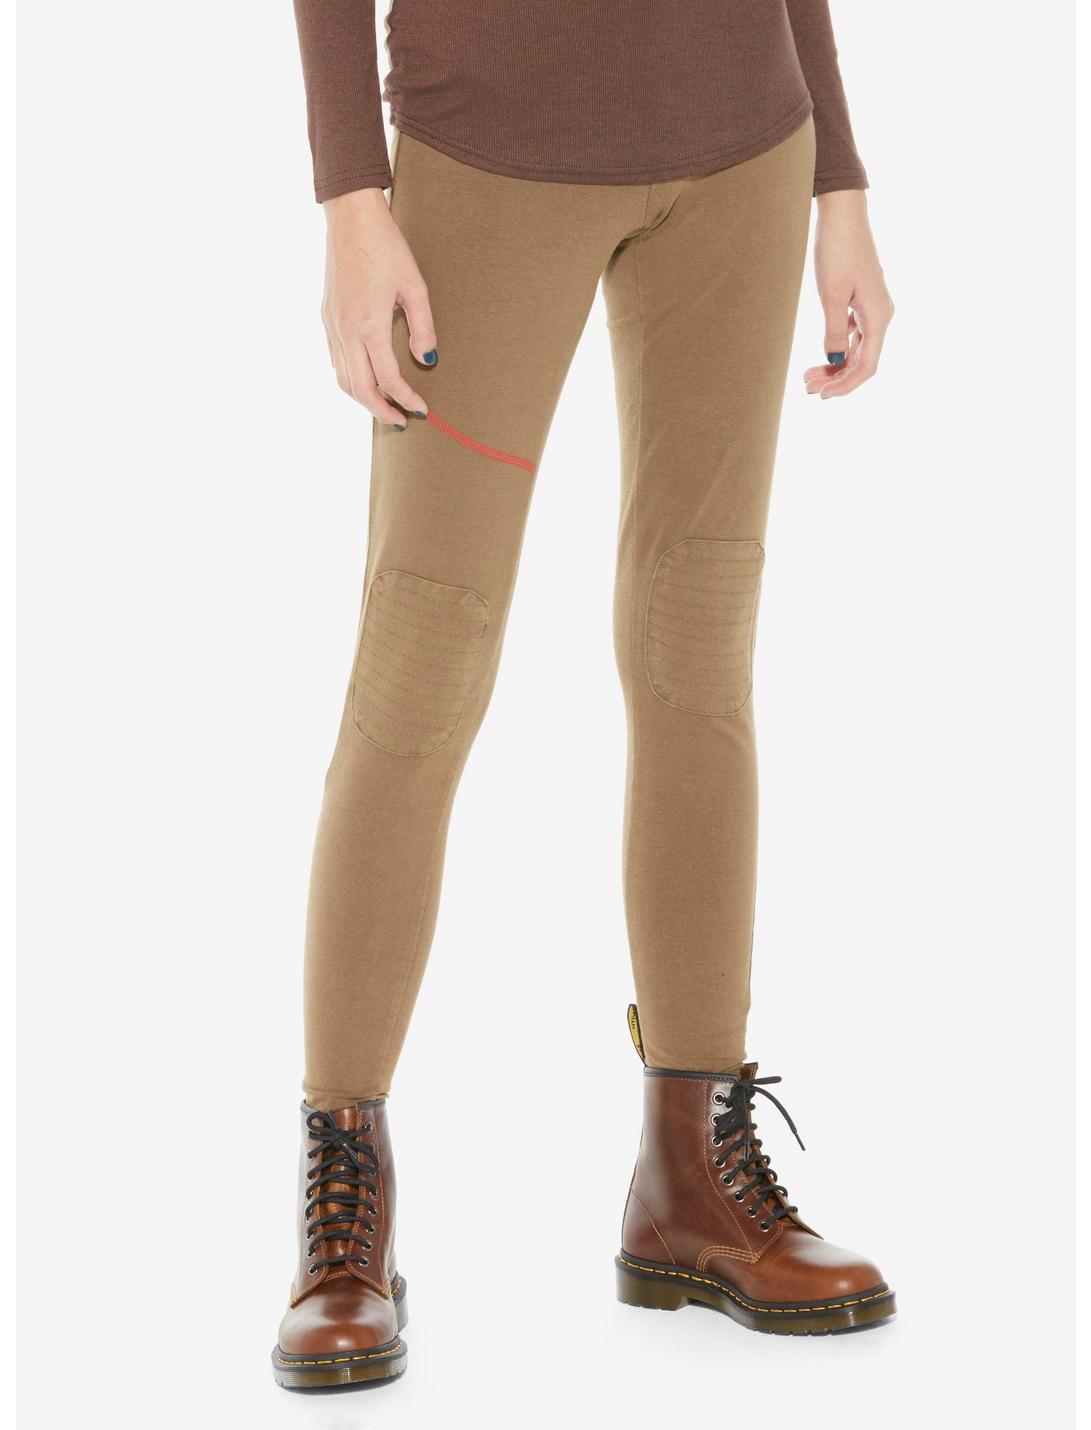 Her Universe Star Wars: The Last Jedi Rey Cosplay Leggings | Hot Topic